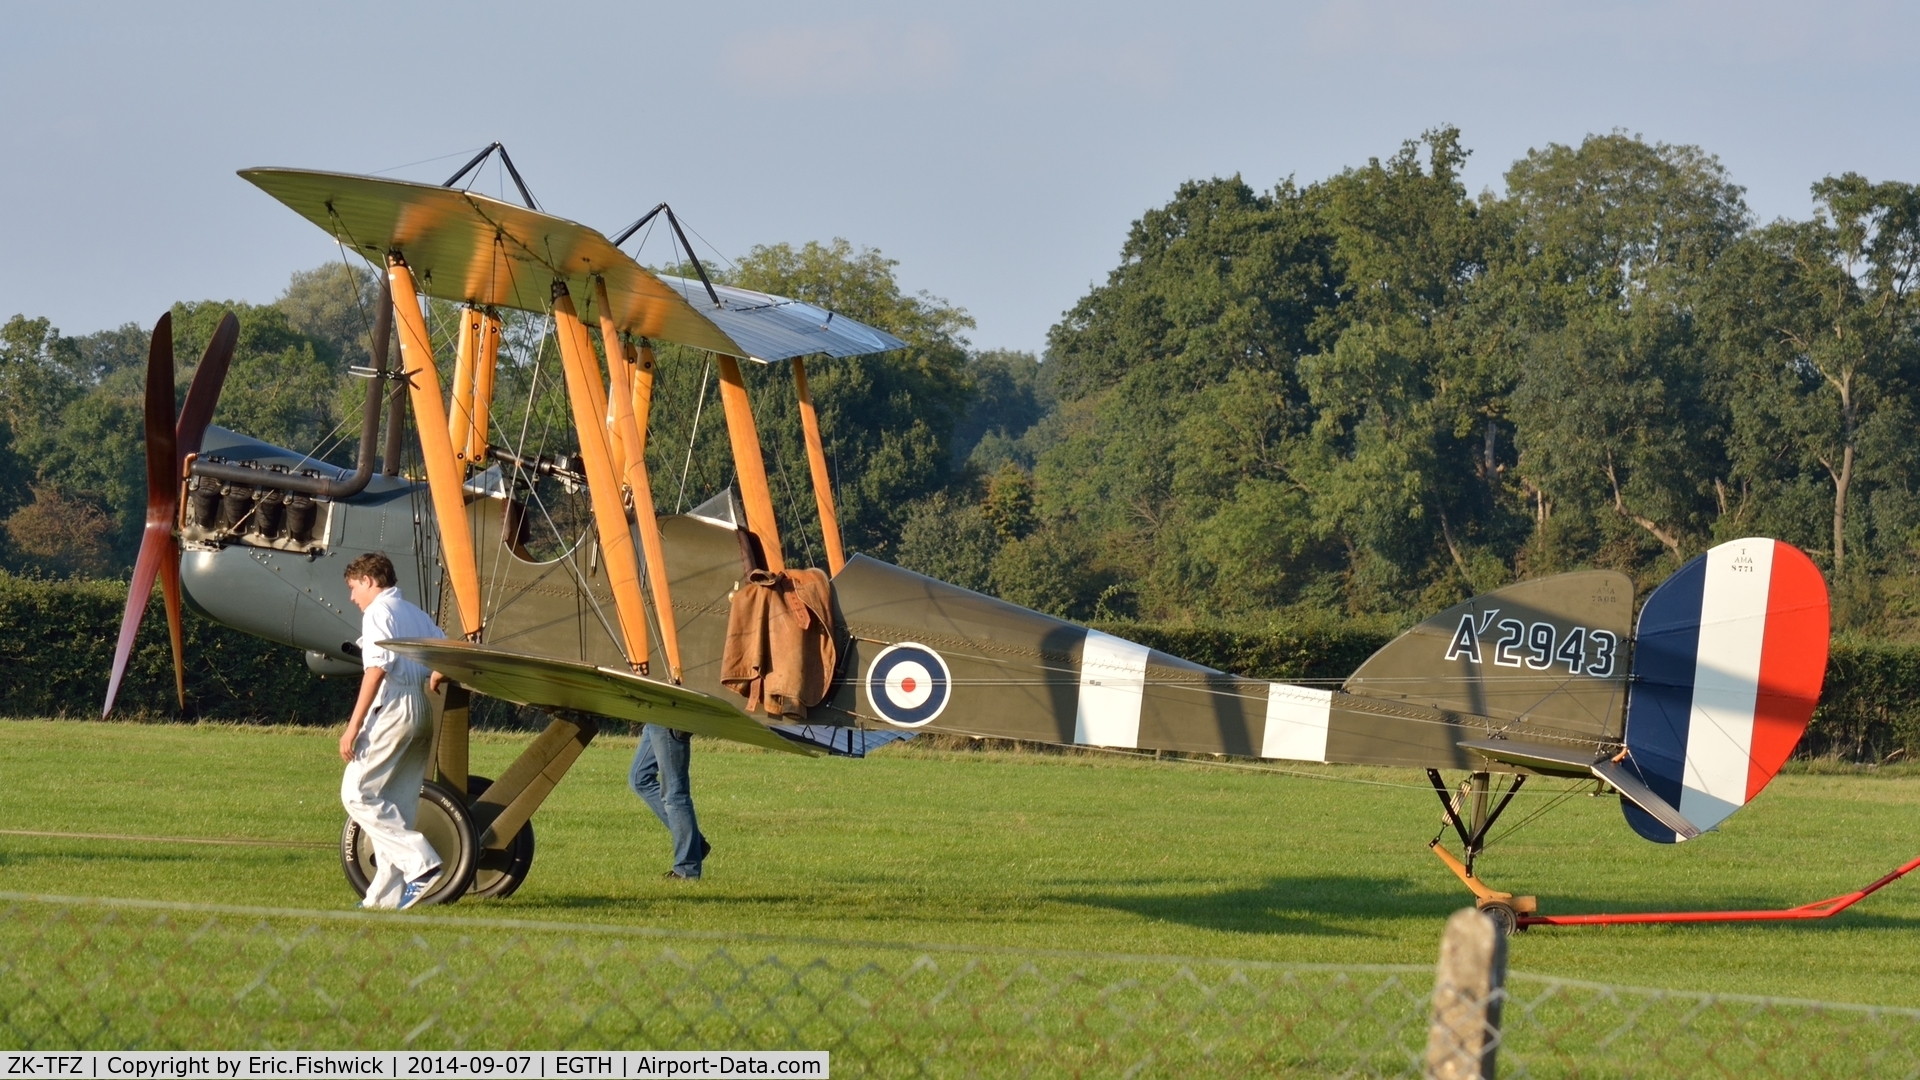 ZK-TFZ, Royal Aircraft Factory BE-2e Replica C/N 753, 4. A'2943 at the glorious Shuttleworth Pagent Airshow, Sep. 2014.